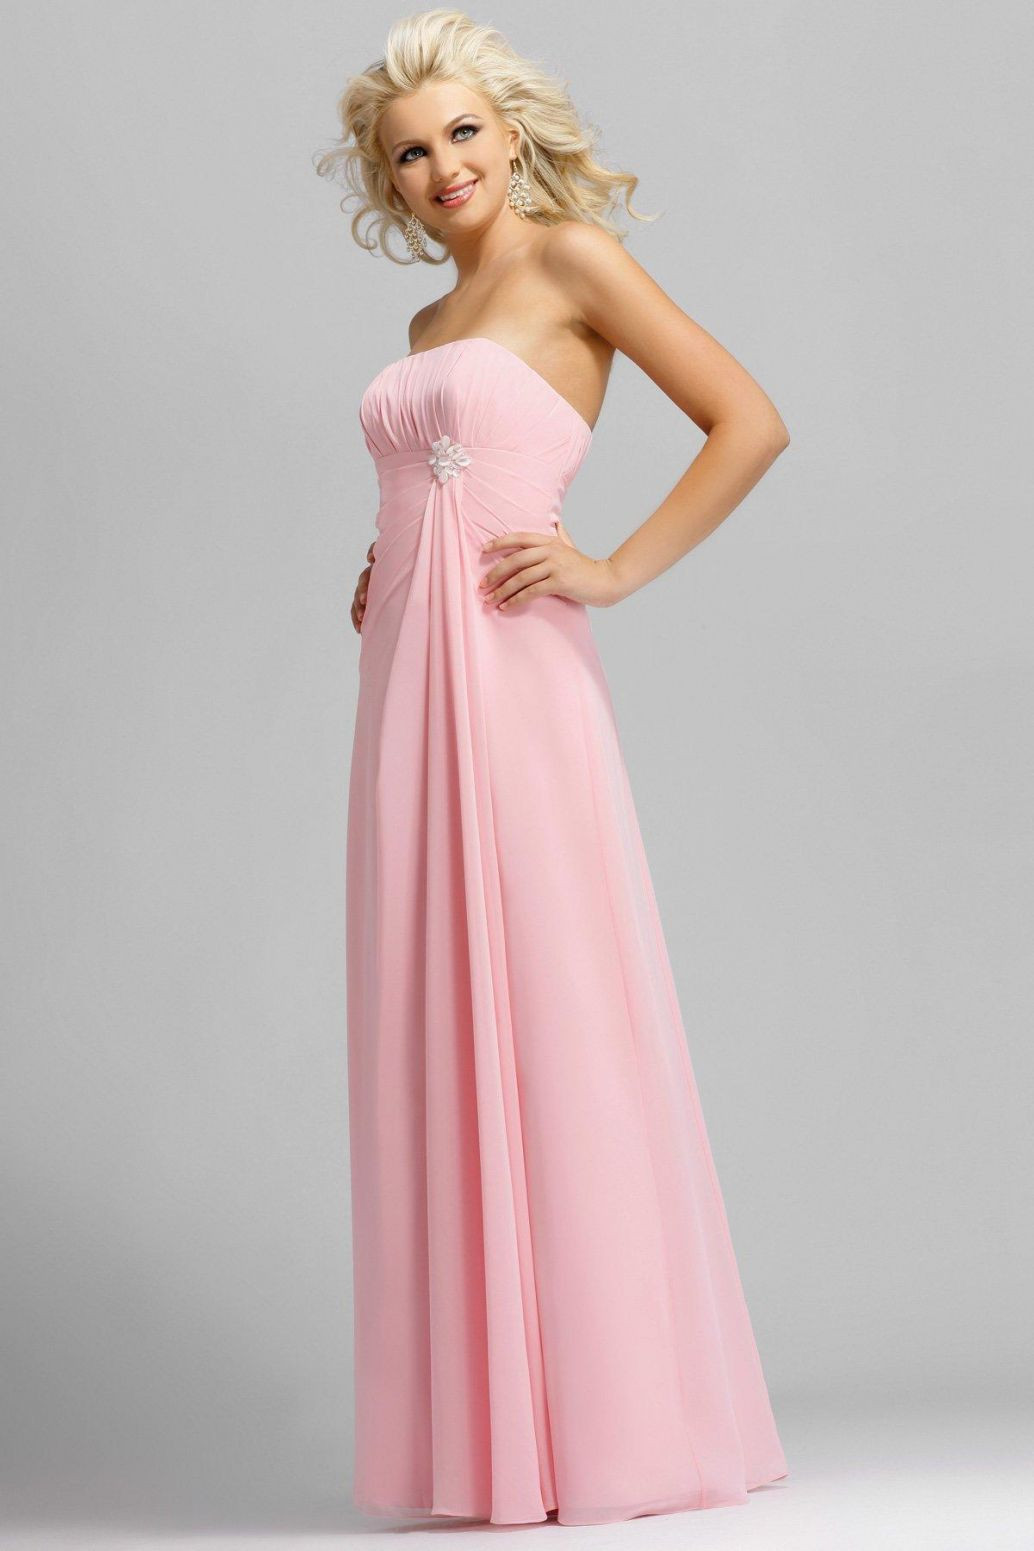 Images Of Wedding Gowns
 Long Bright Pink Bridesmaid Dress Designs Wedding Dress